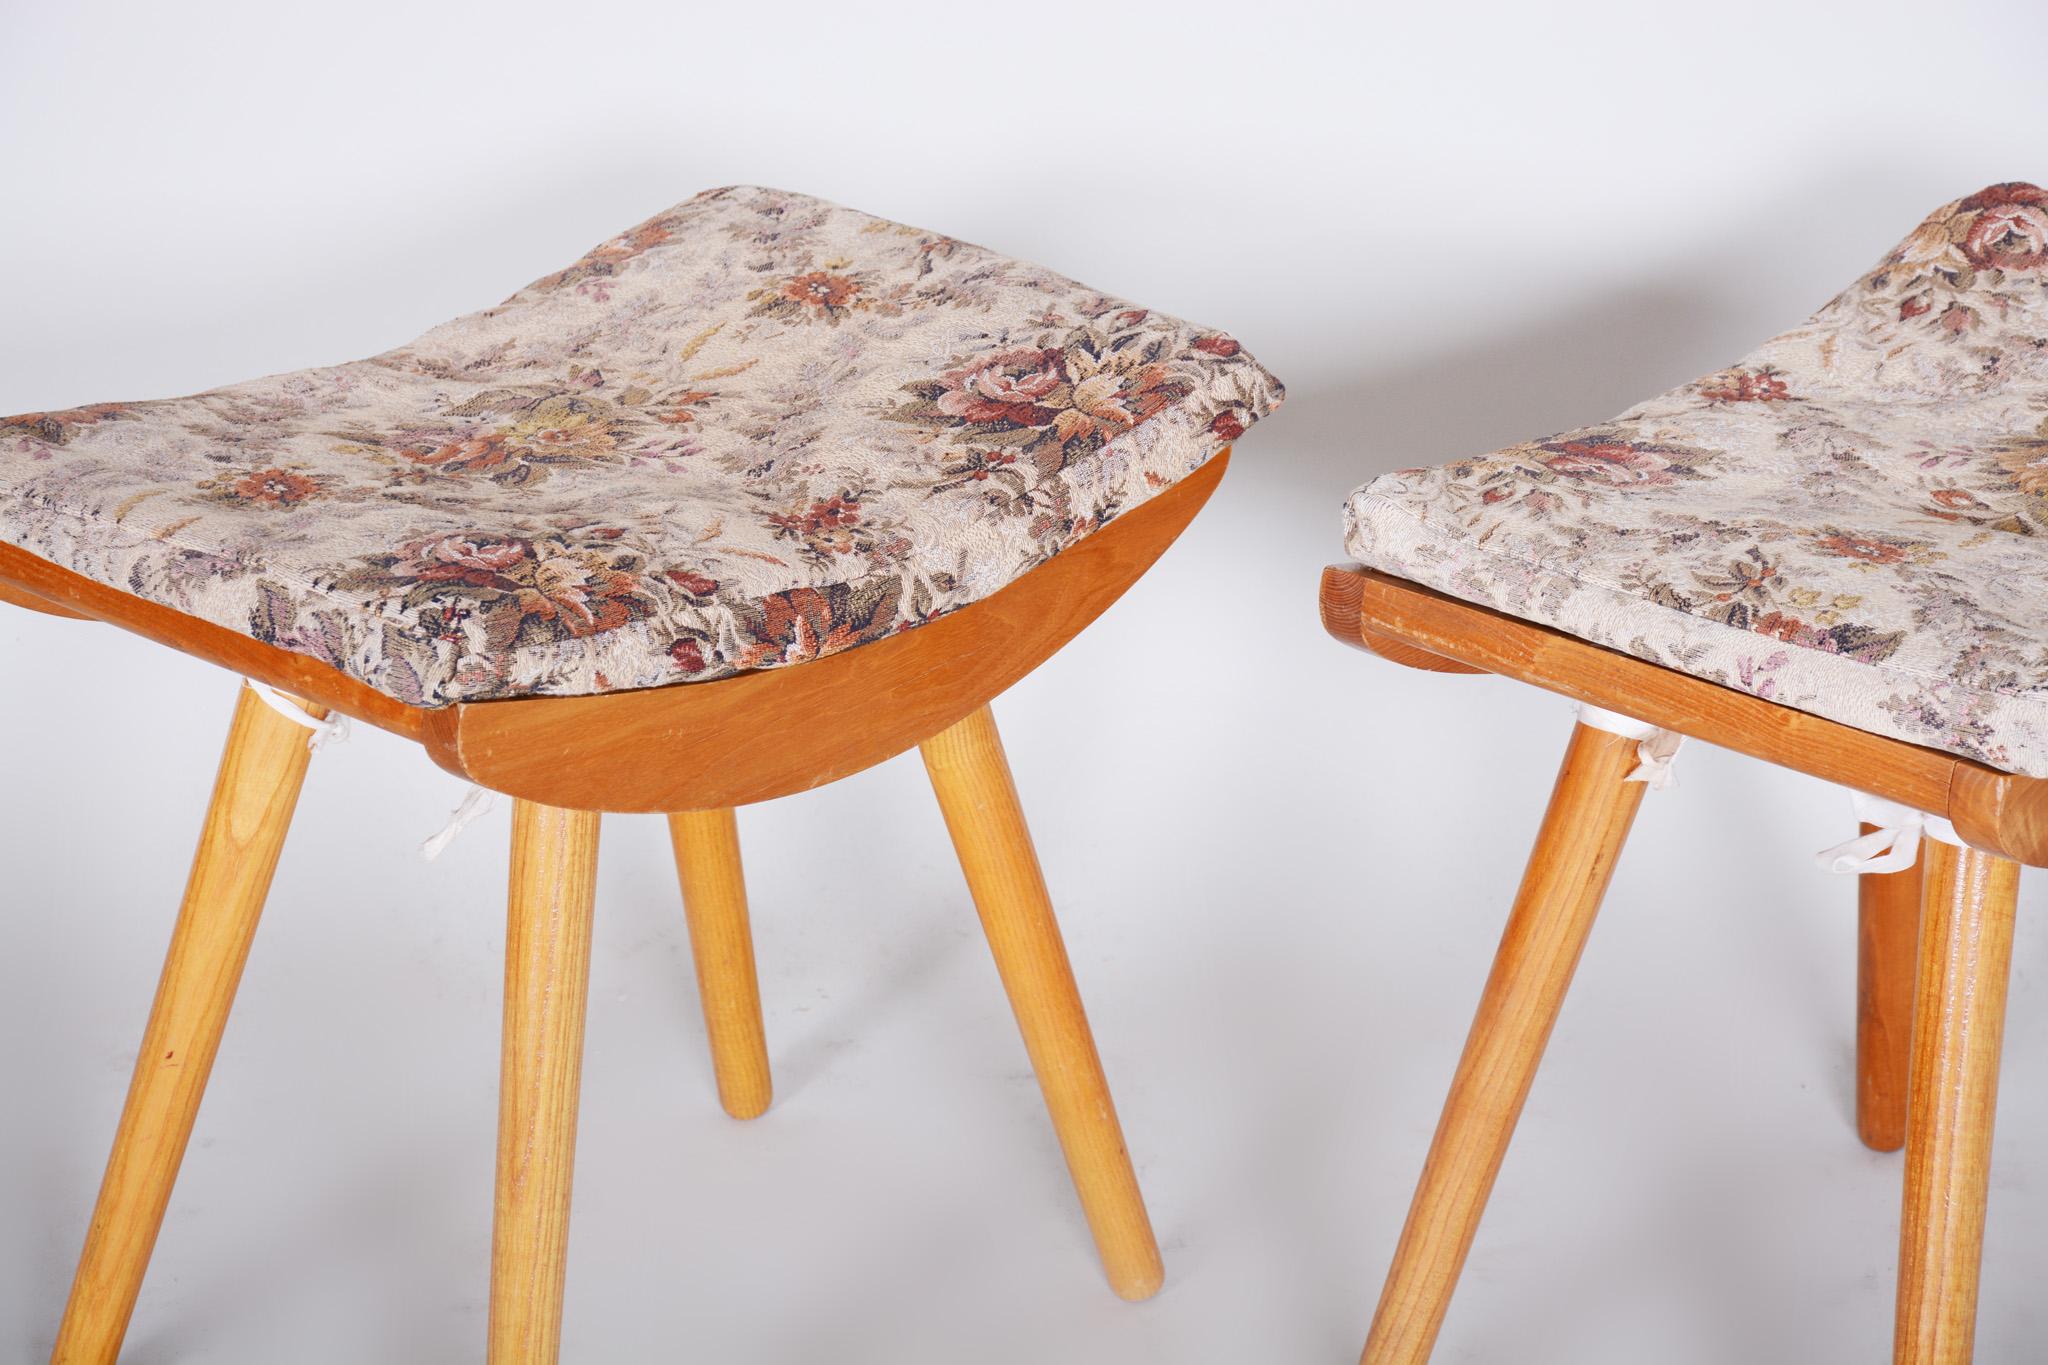 Mid-20th Century Pair of Midcentury Ash Stools, 1960s, Original Preserved Condition For Sale